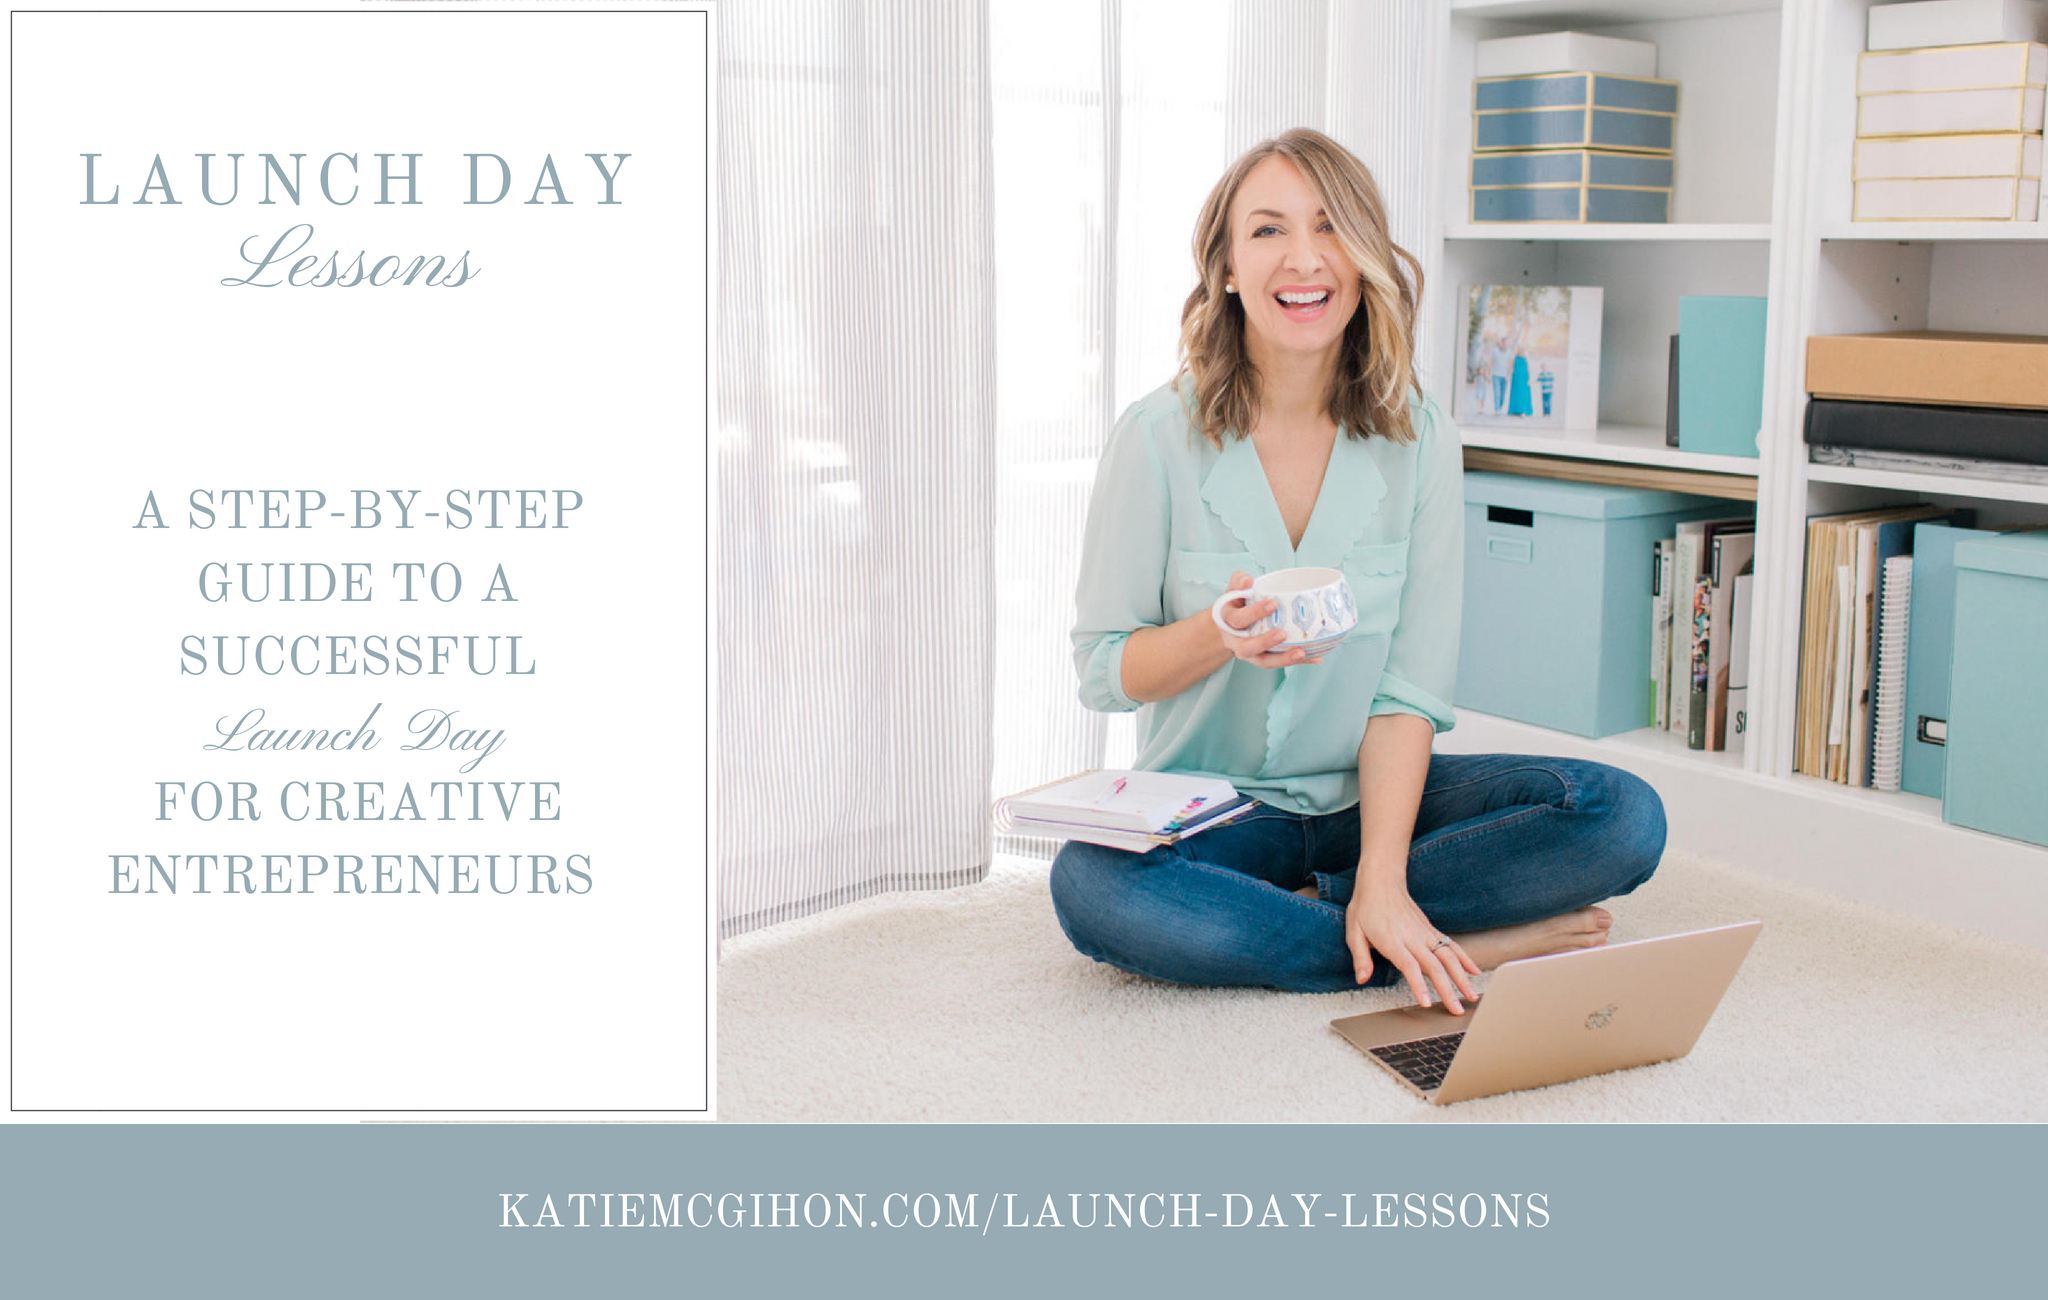 Launch day lessons for the successful creative entreprenuer